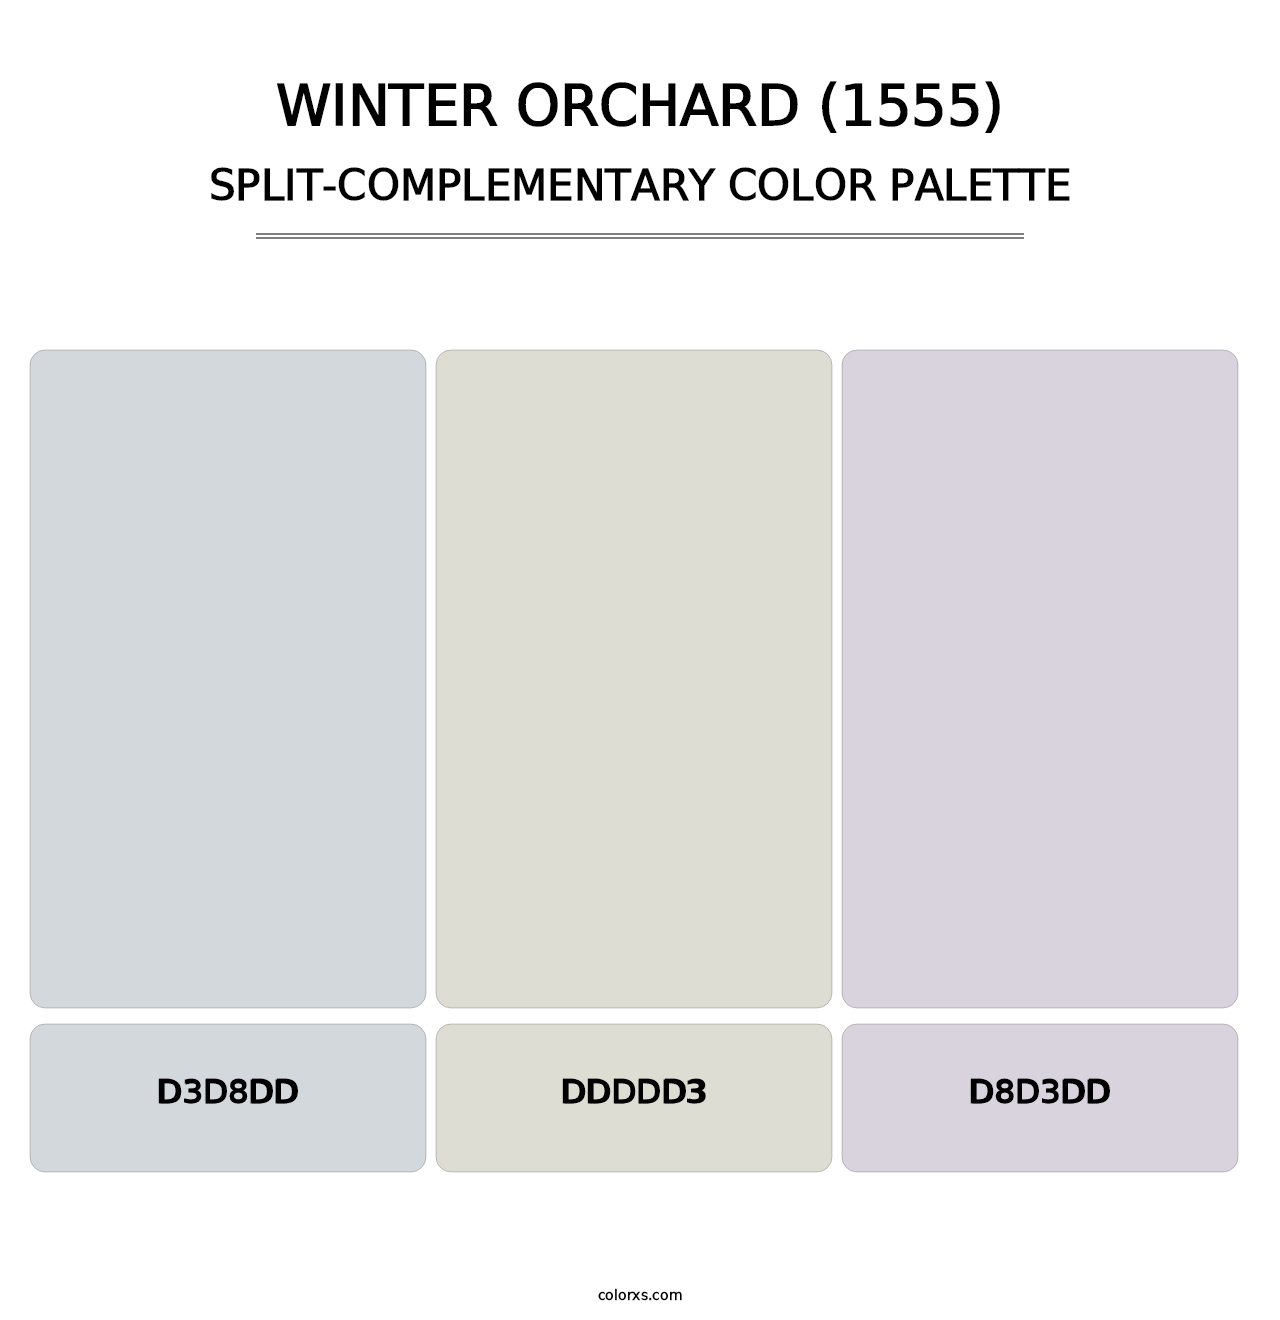 Winter Orchard (1555) - Split-Complementary Color Palette